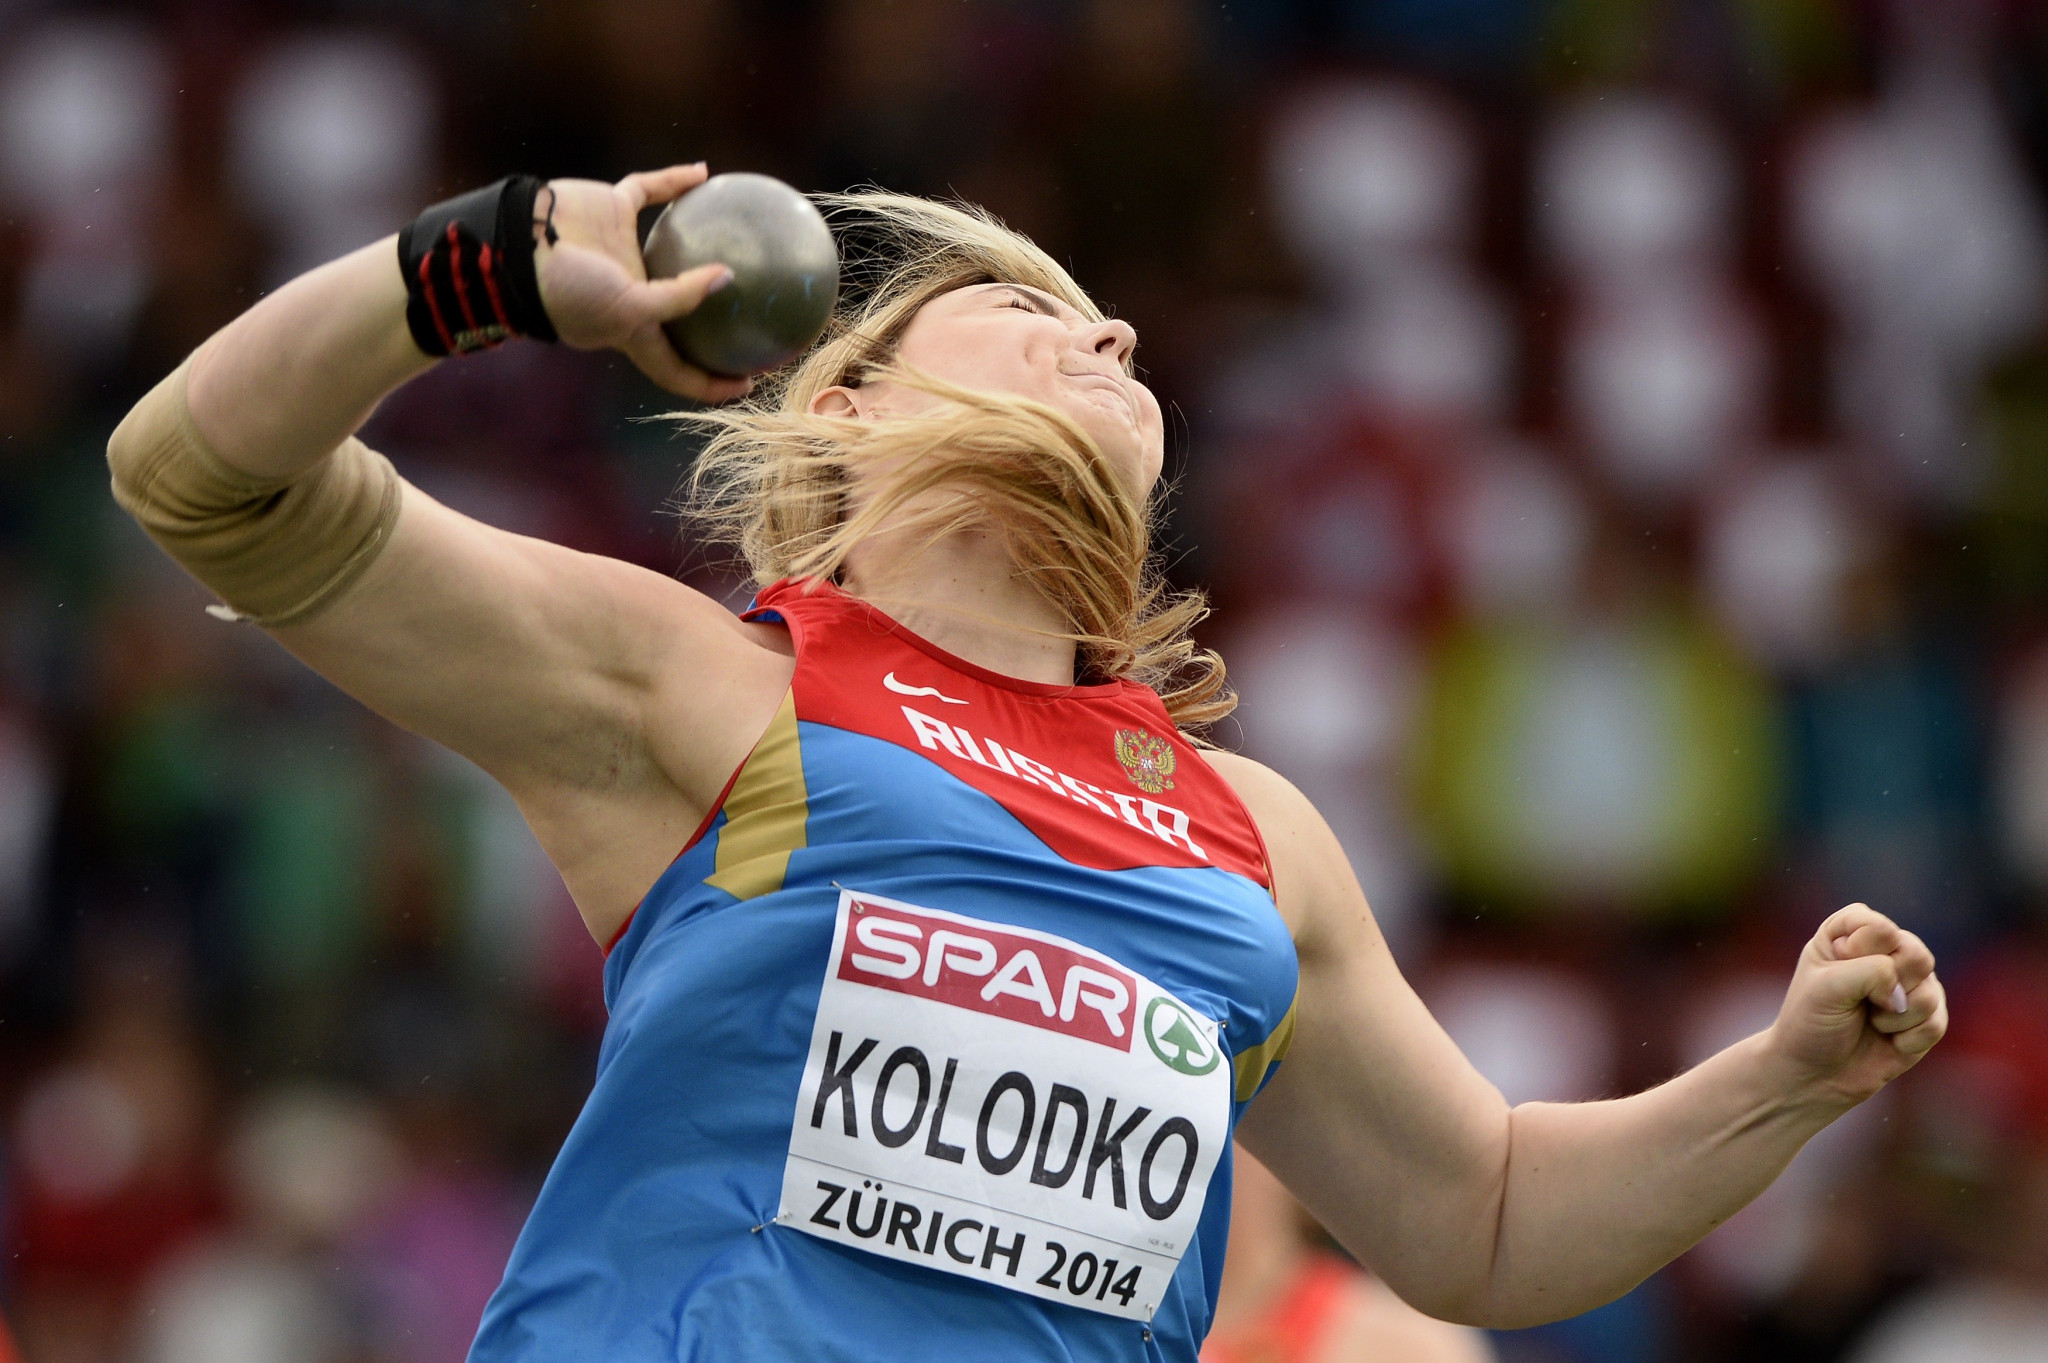 Shot putter Yevgeniya Kolodko is among the latest batch of Russians to be banned by the AIU, meaning she will be stripped of the silver medal she won at the 2014 European Championships in Zurich ©Getty Images